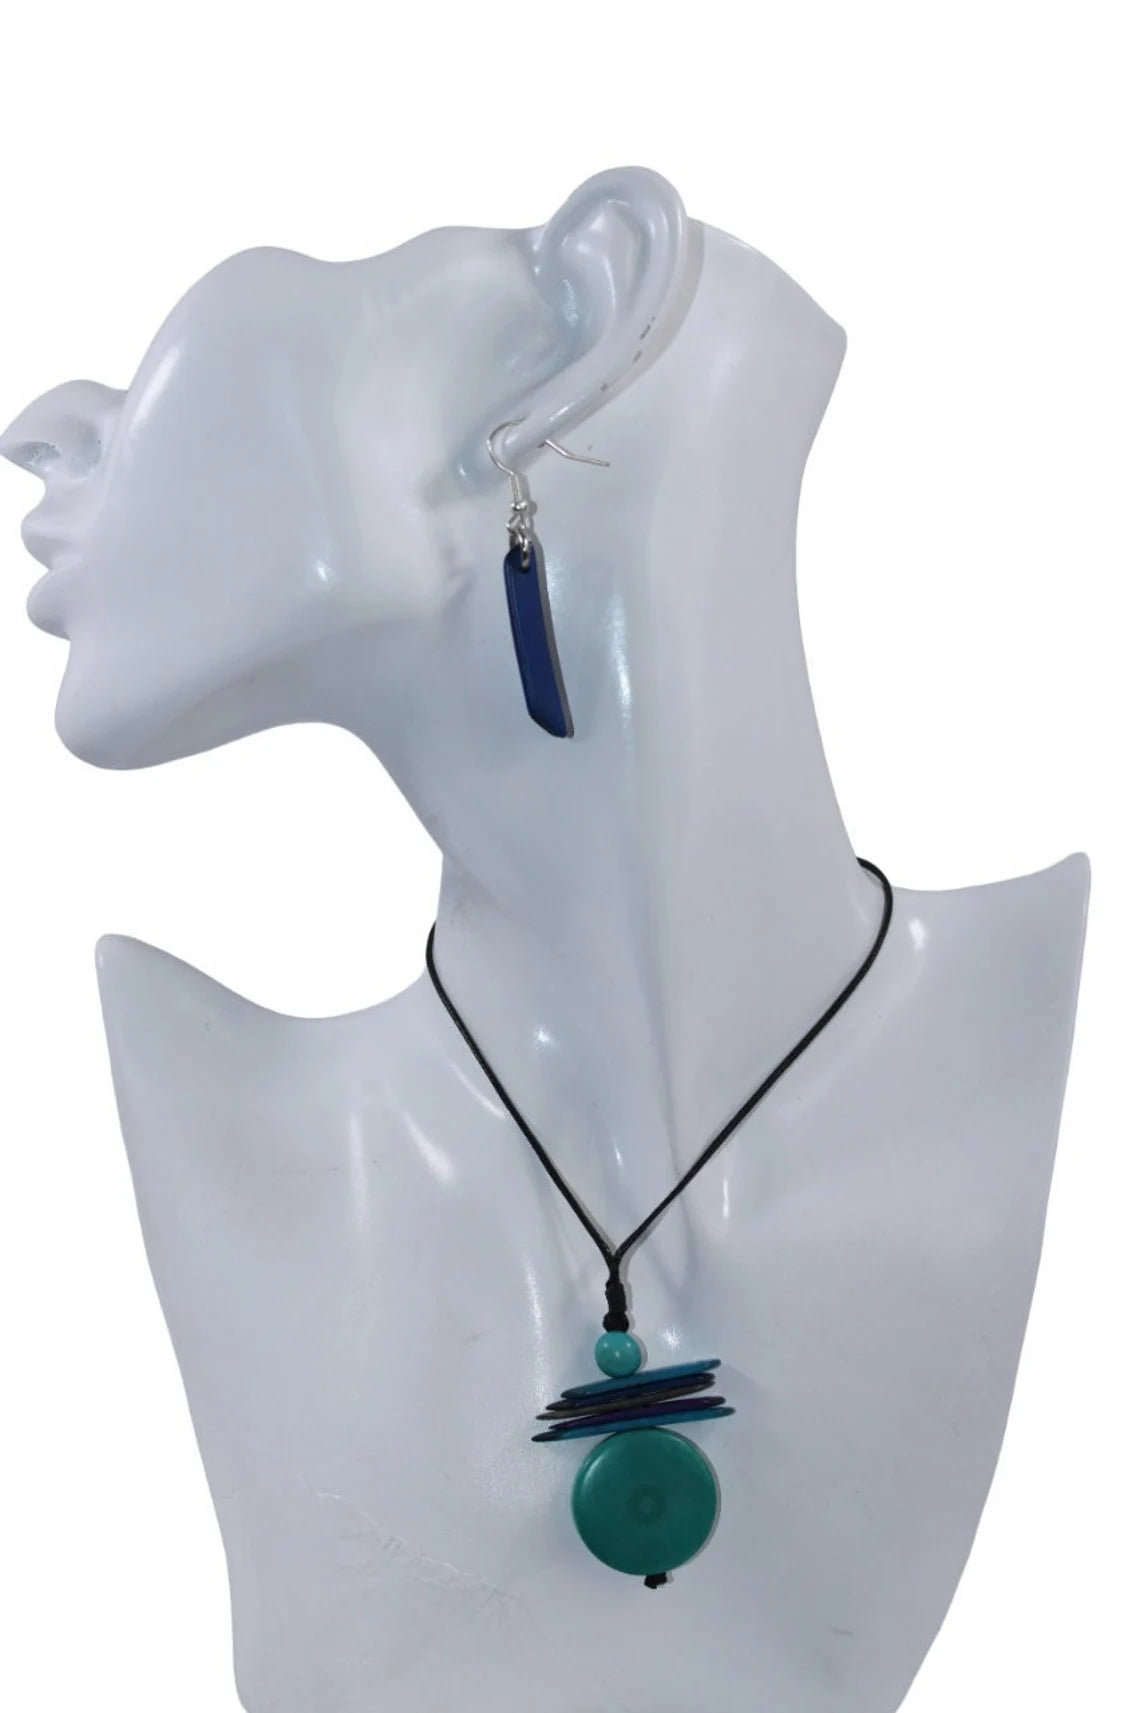 Tagua Pendant Necklace and Earrings Set in Blue and Purple Colors.